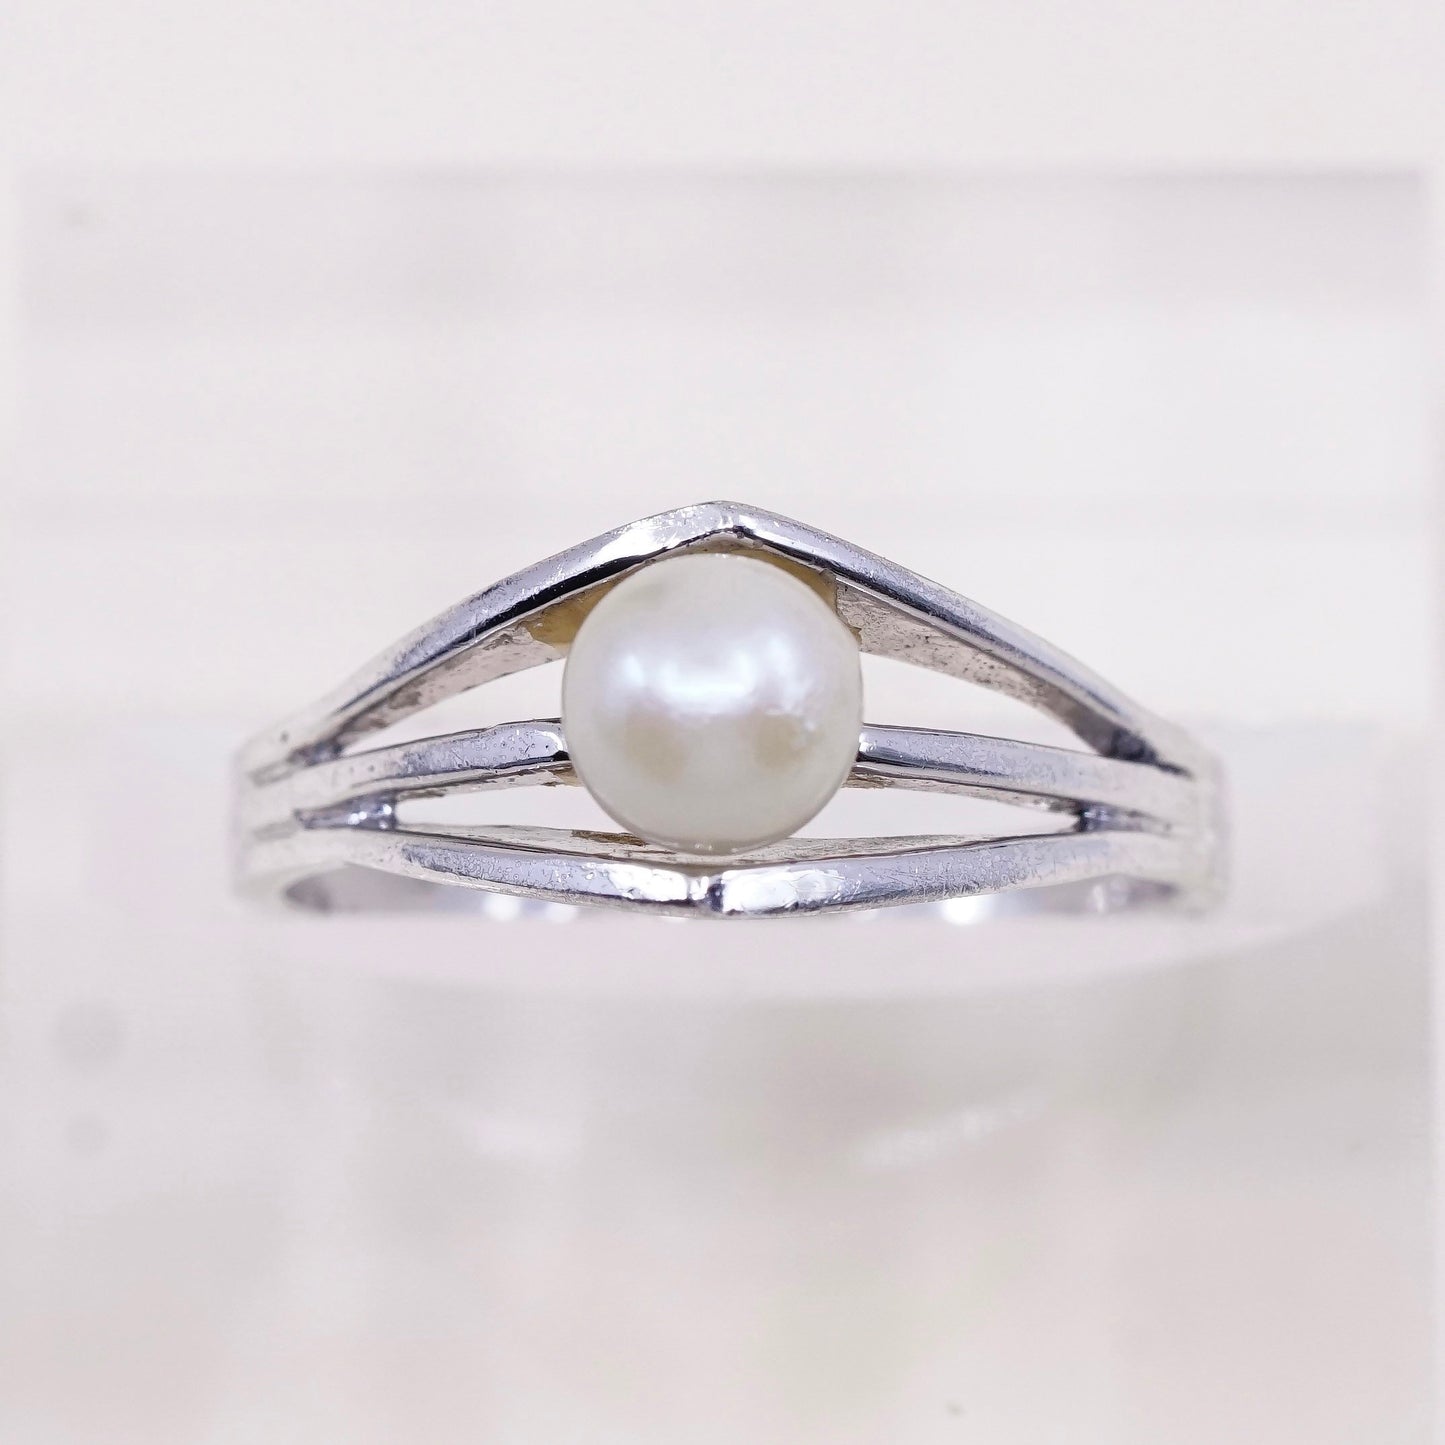 Size 8.25, vintage Sterling silver handmade ring, modern 925 band with pearl